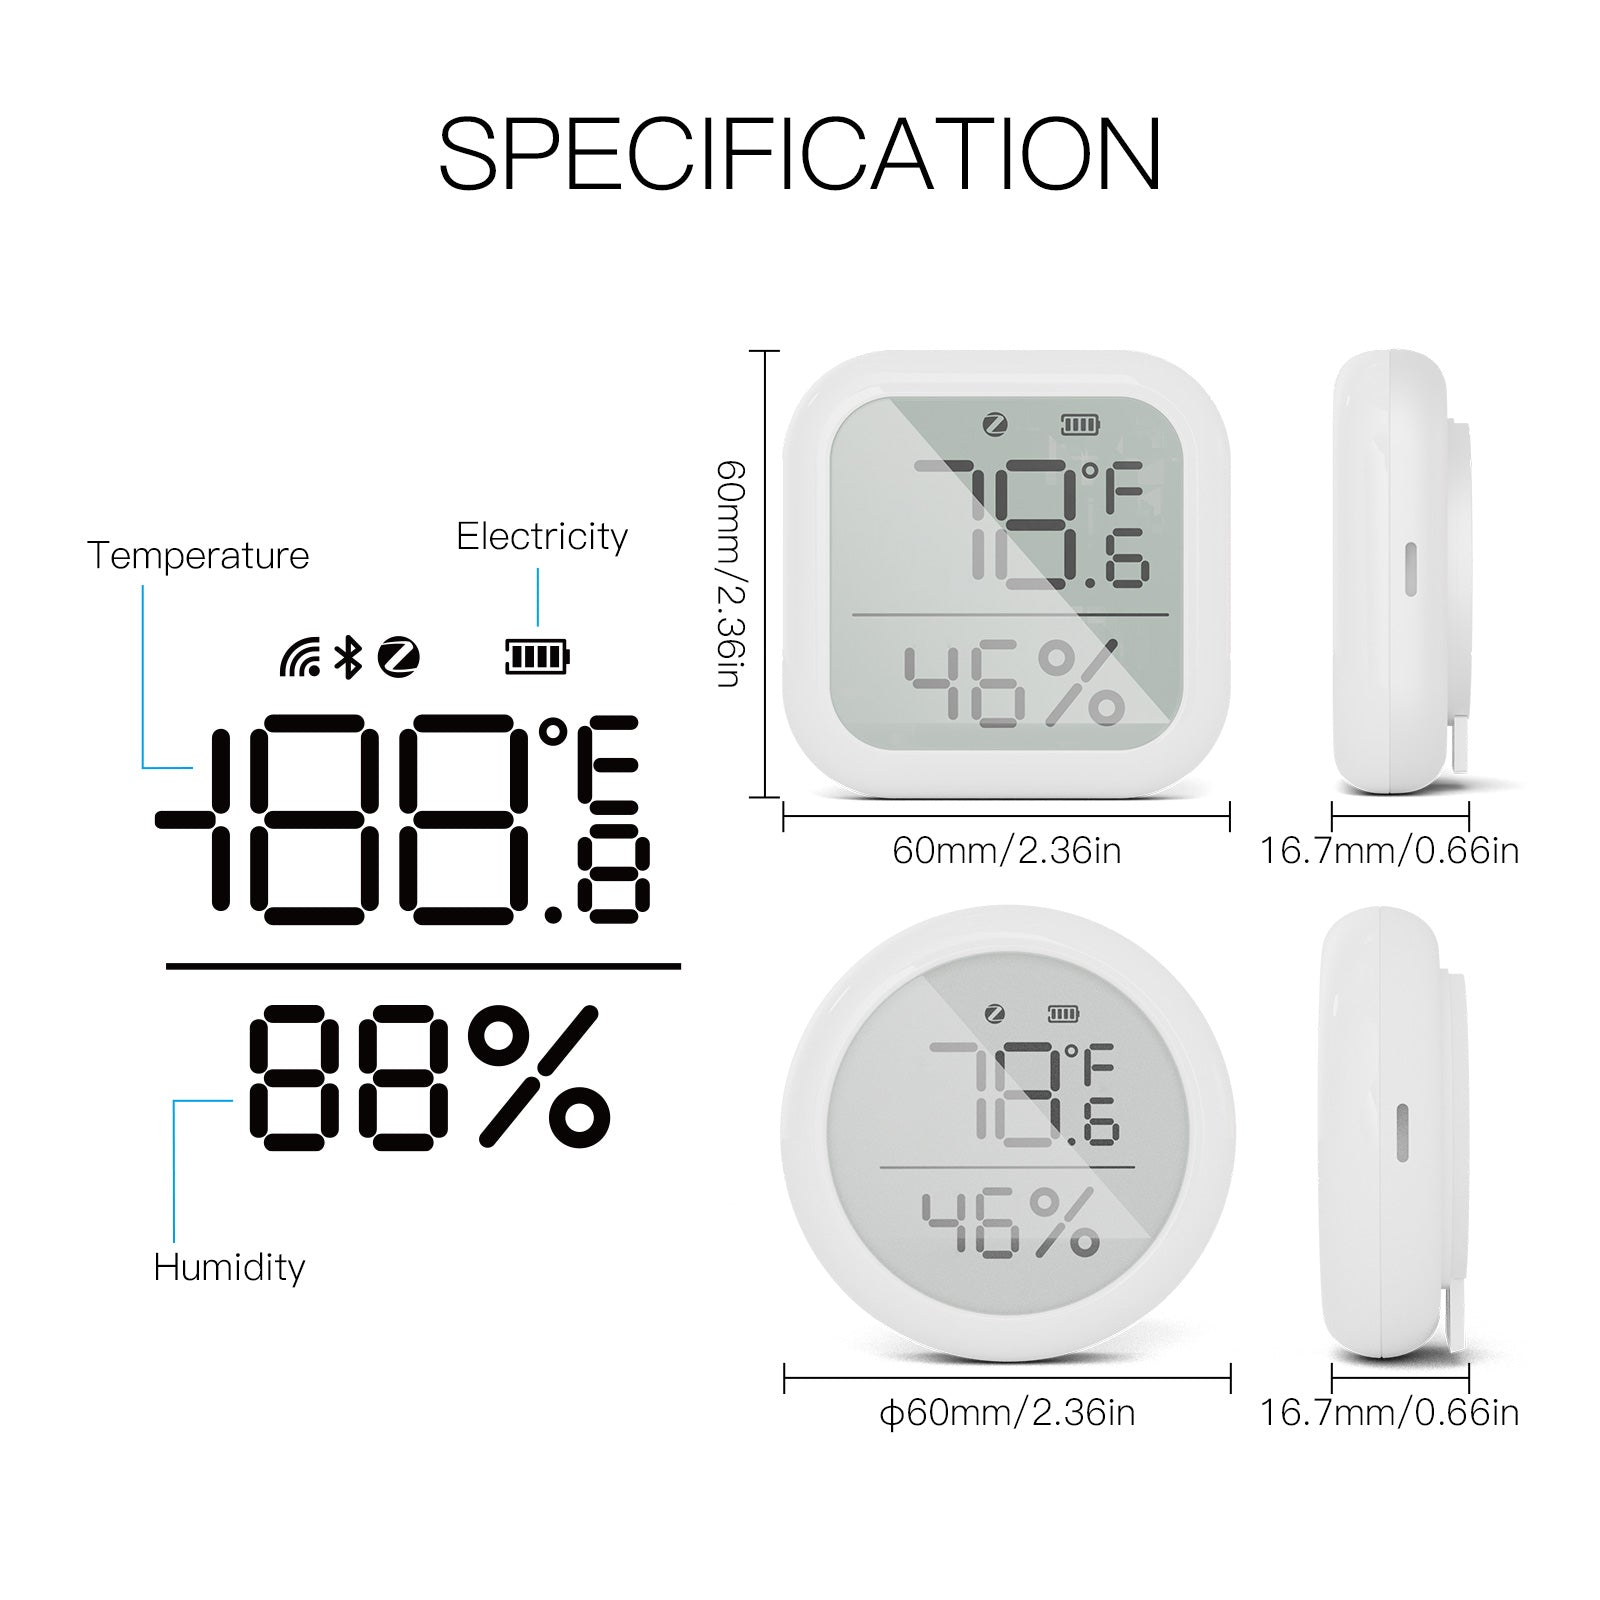 WiFi Smart Thermometer Wall-Mounted Hygrometer Thermometer, Humidity Temperature Gauge with Remote Monitor, Large LCD Display, White, Size: 64 x 64 x